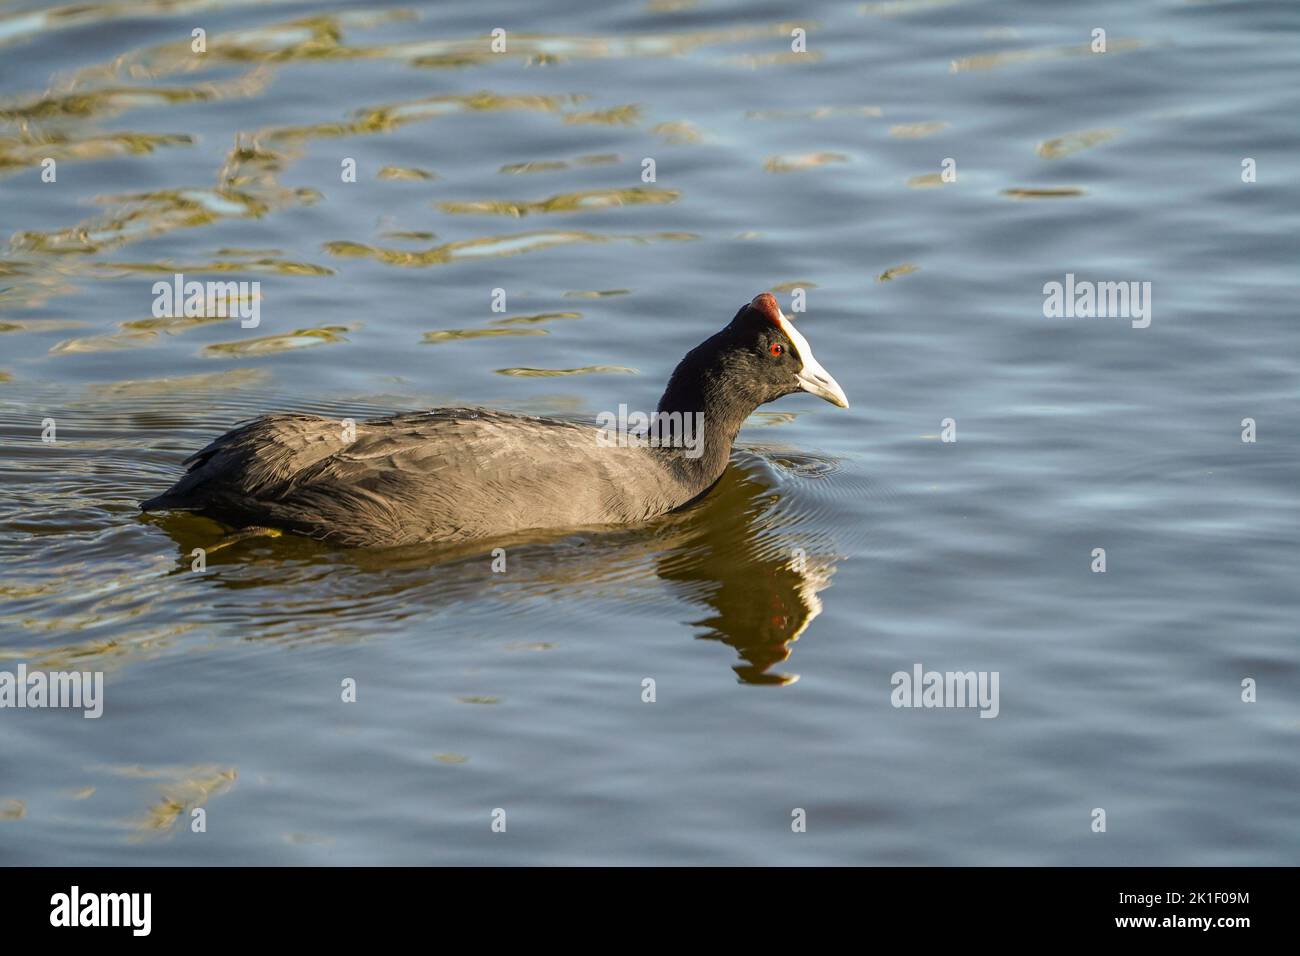 Coot rosso-knobbed, Coot crested, (Fulica cristata) lago d'acqua dolce, Andalucia, Spagna meridionale. Foto Stock